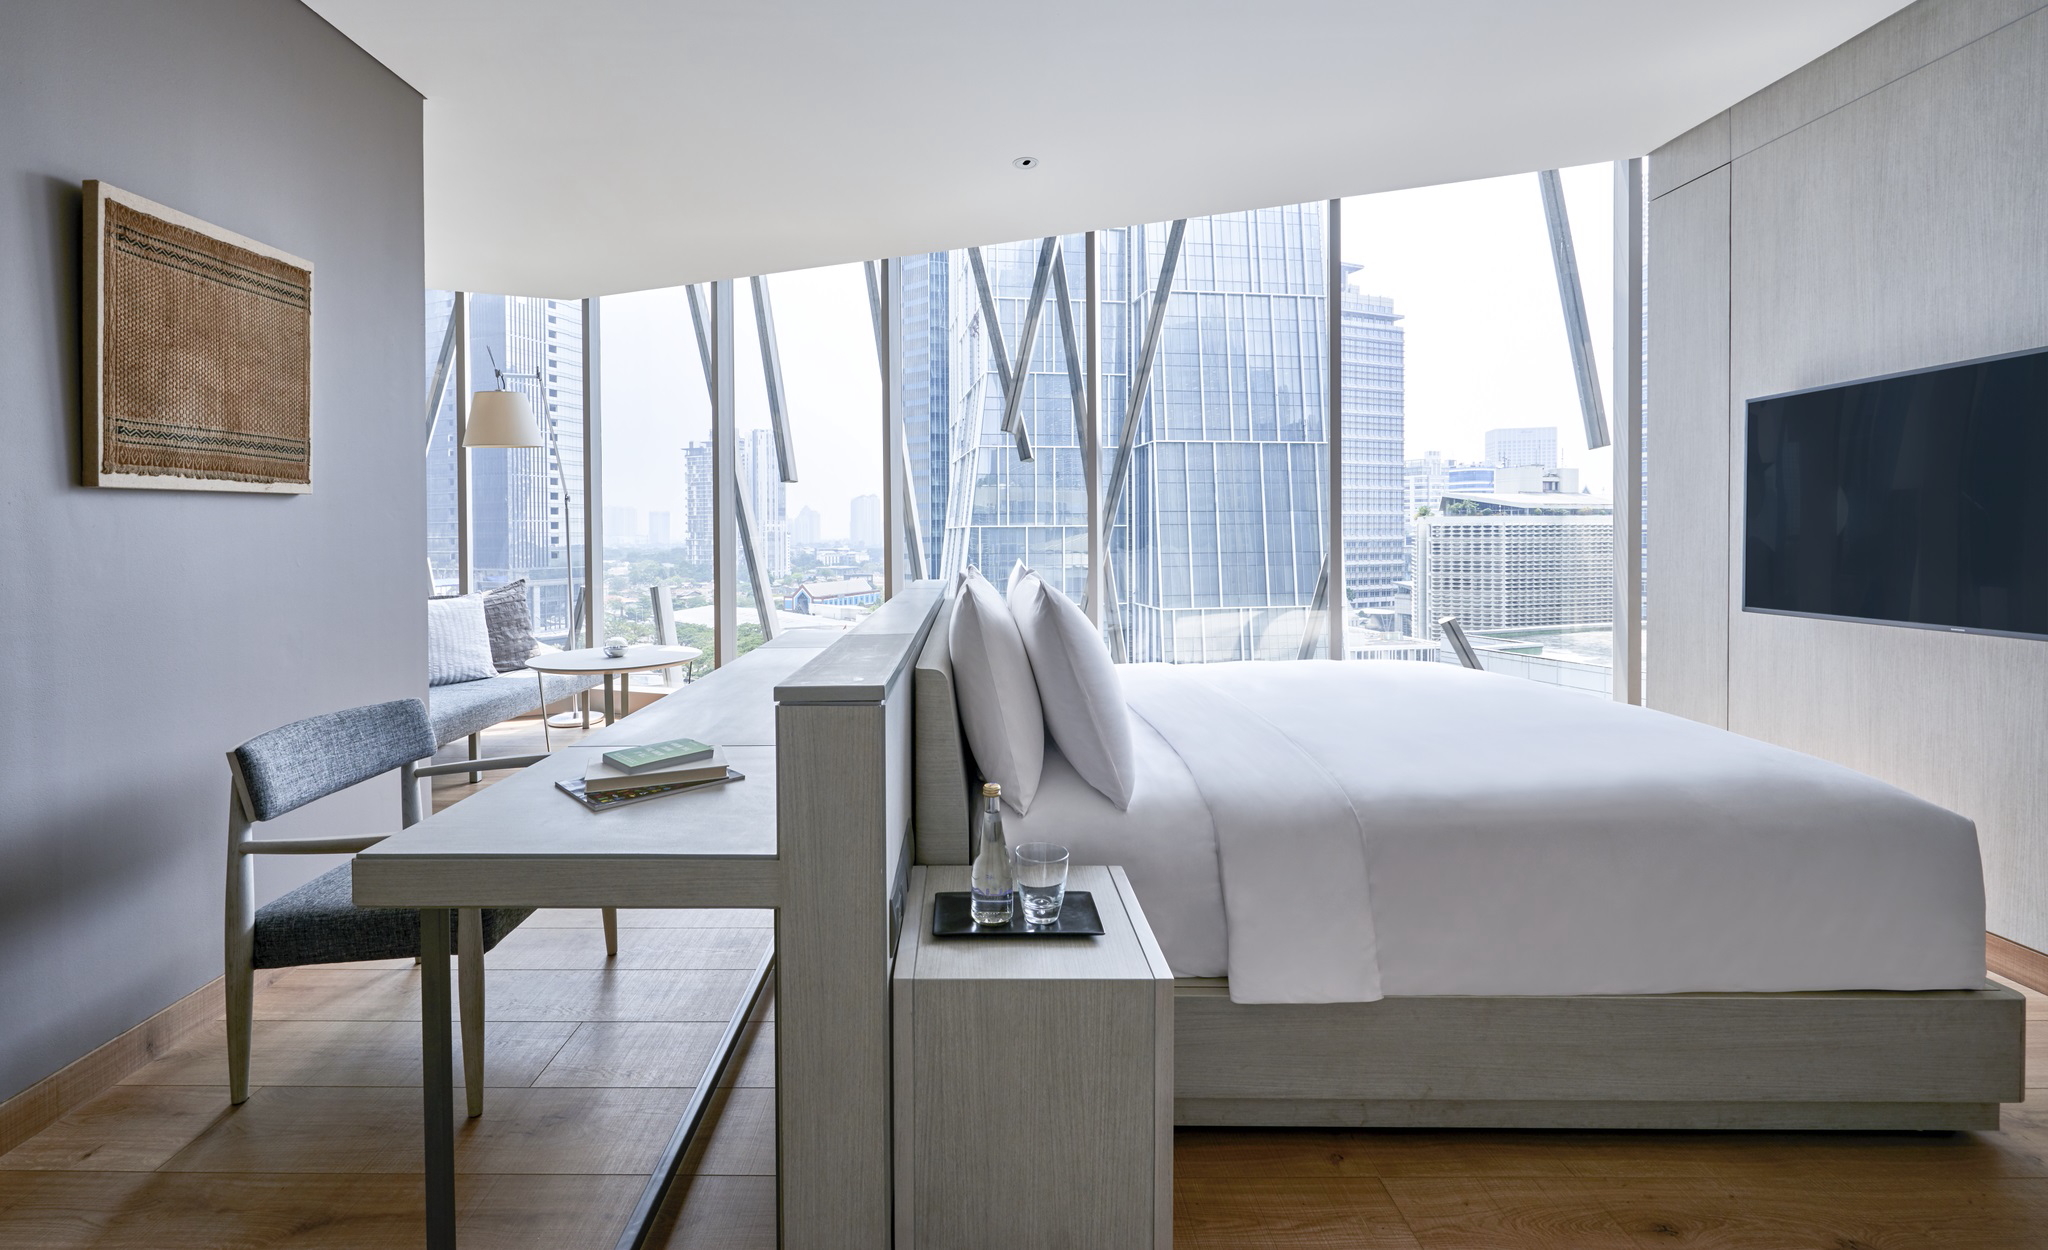 Room at Alila SCBD Jakarta in Indonesia. Click to enlarge.